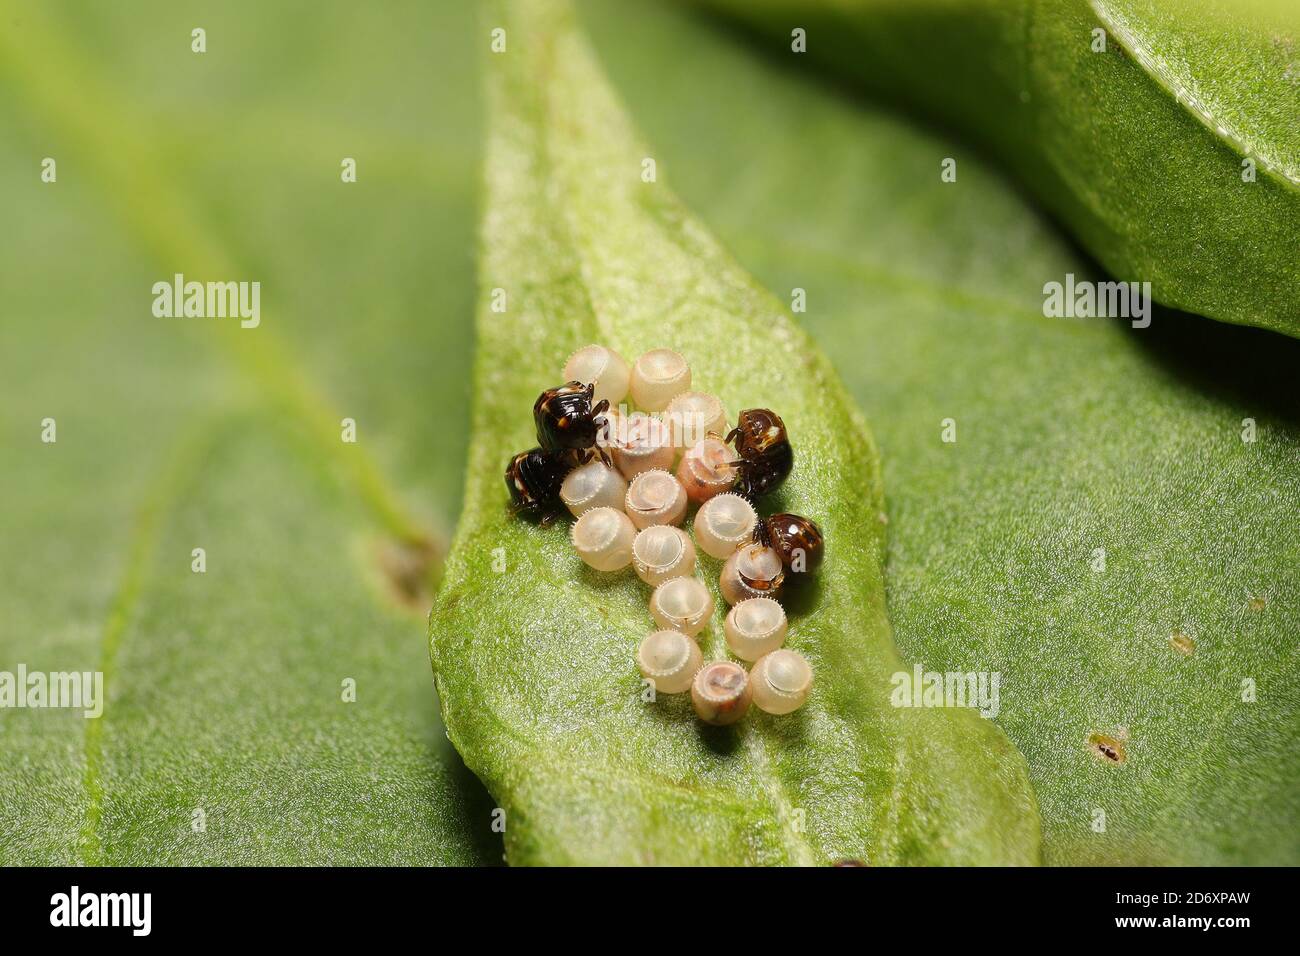 Tiny shield bugs which have just been hatched. Stock Photo